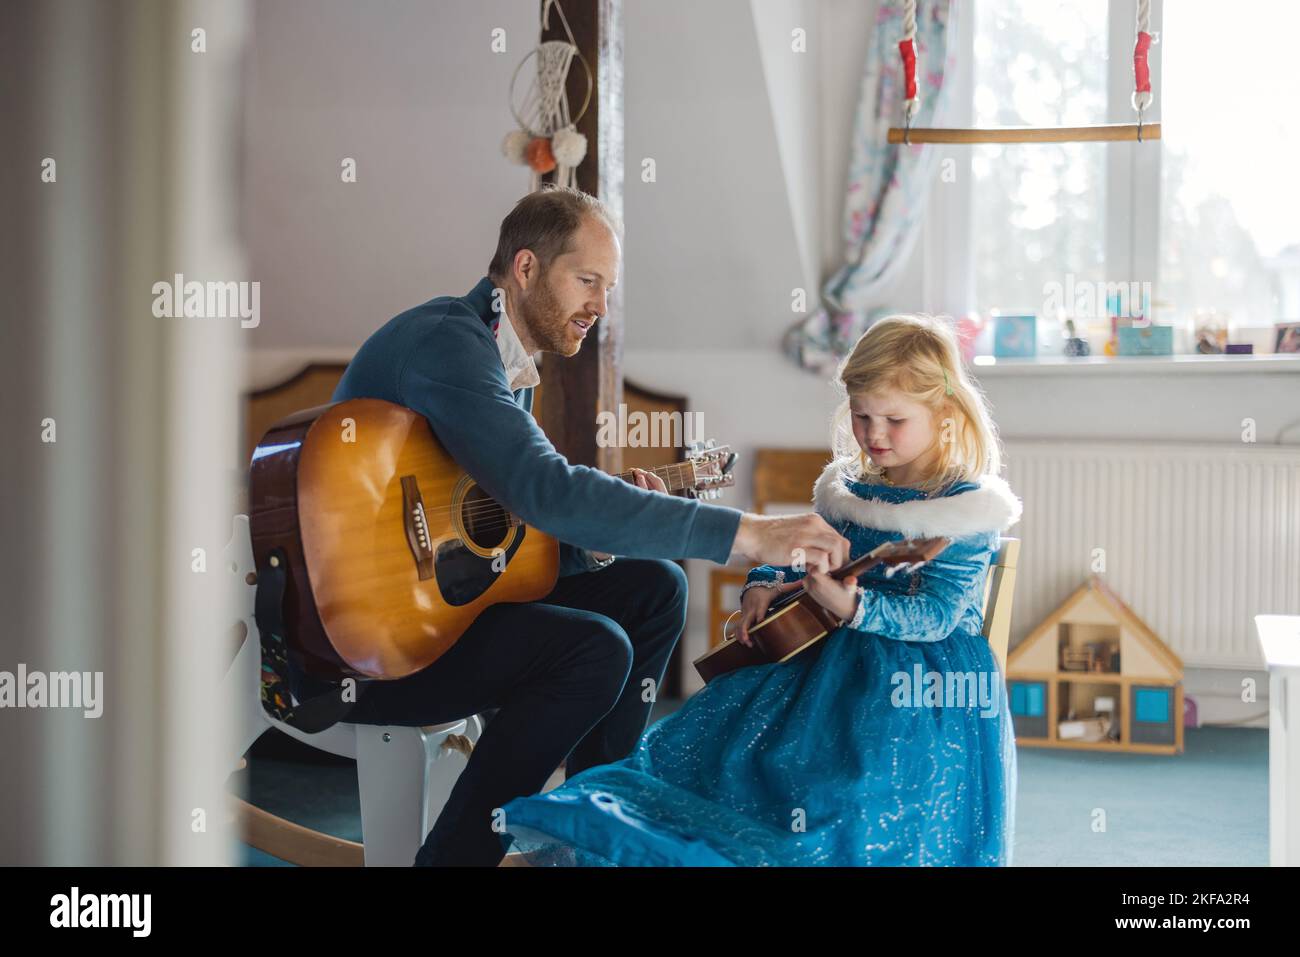 Dad teaching his daughter how to play guitar Stock Photo